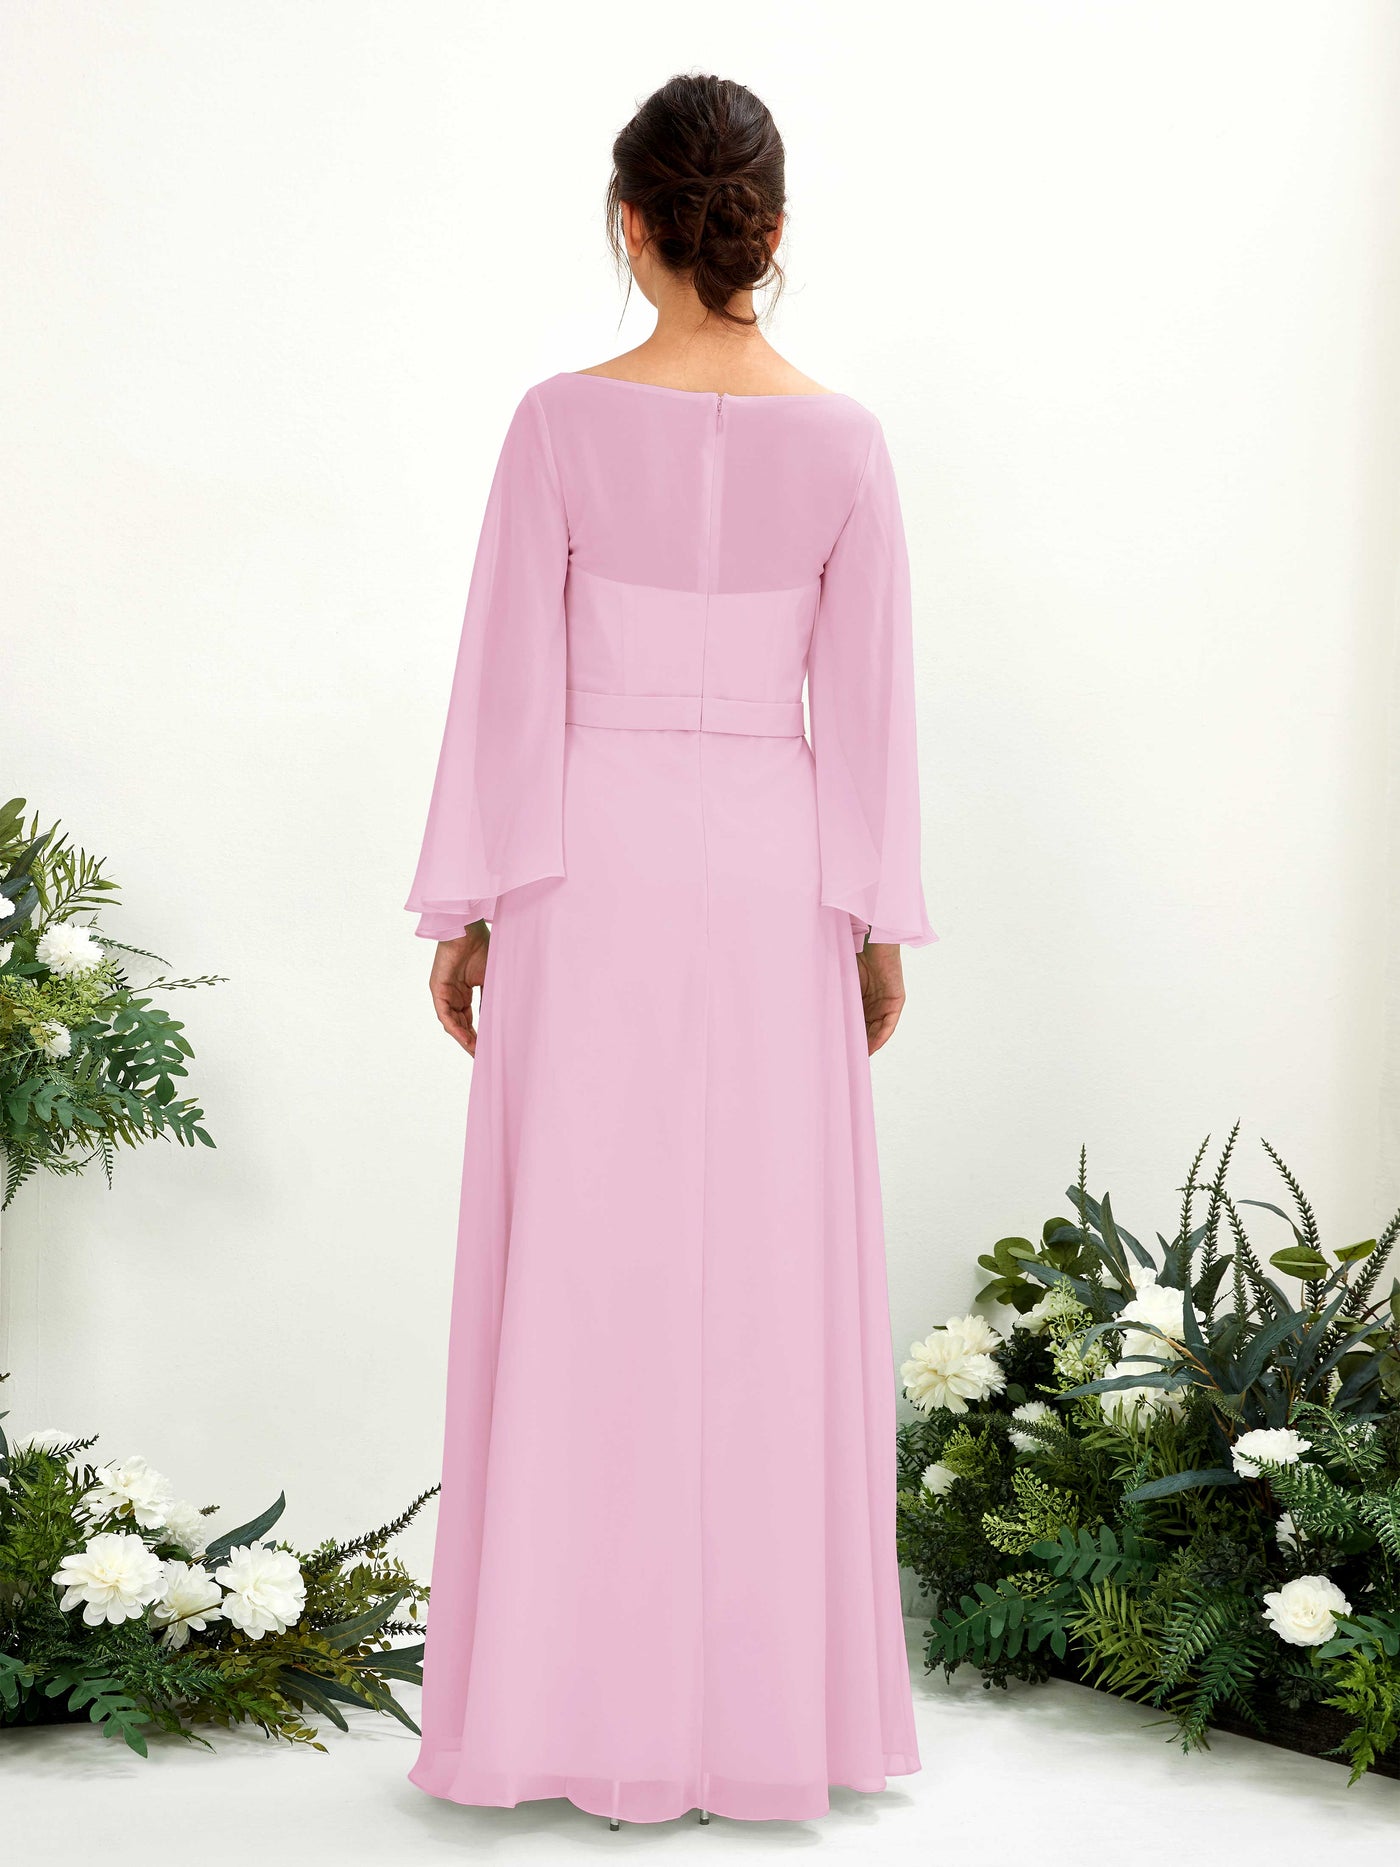 Candy Pink Bridesmaid Dresses Bridesmaid Dress A-line Chiffon Bateau Full Length Long Sleeves Wedding Party Dress (81220539)#color_candy-pink